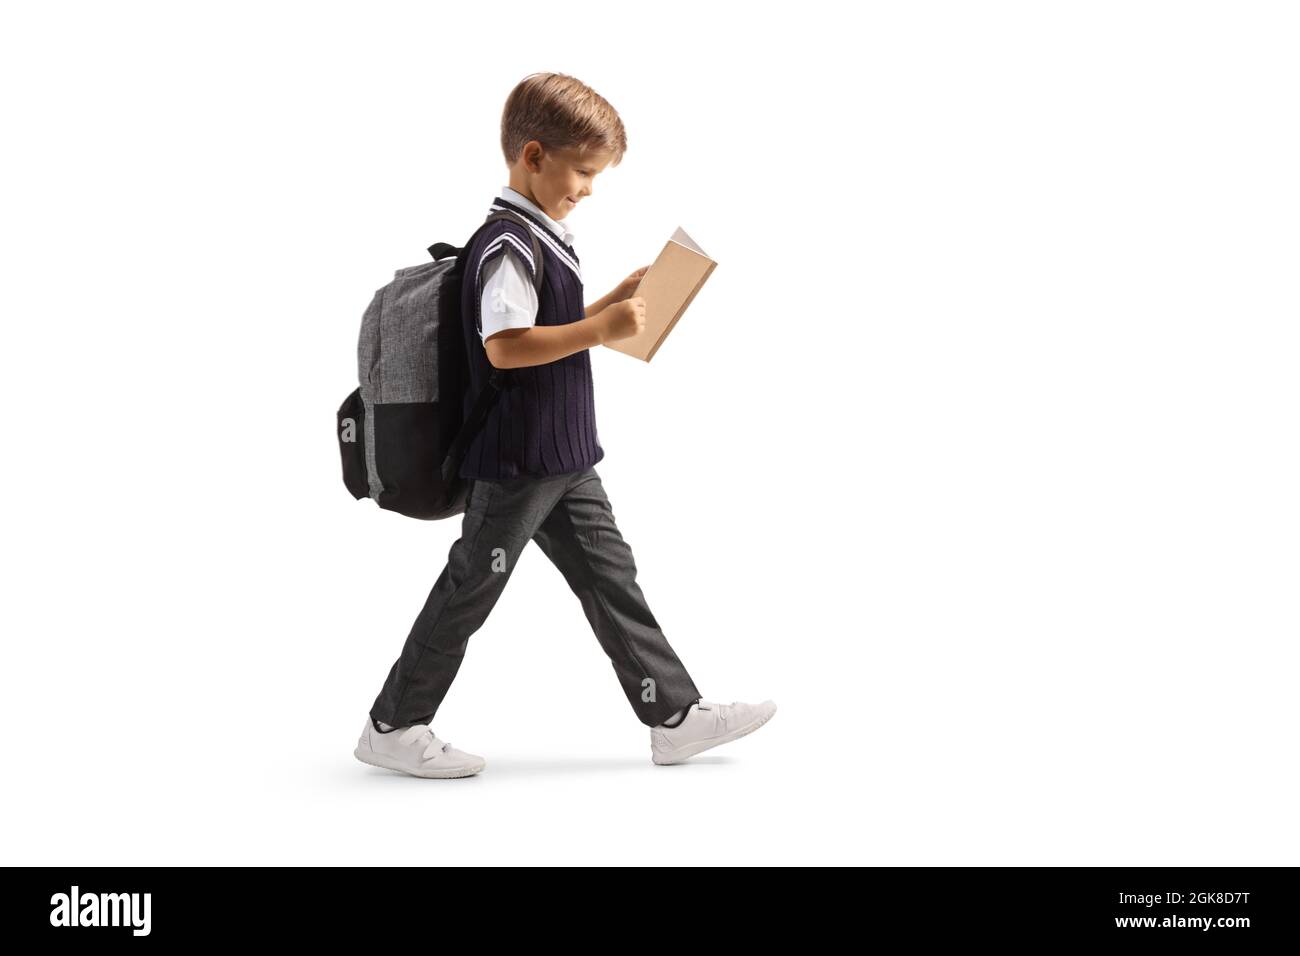 Full length profile shot of a schoolboy in a uniform walking and reading a book isolated on white background Stock Photo